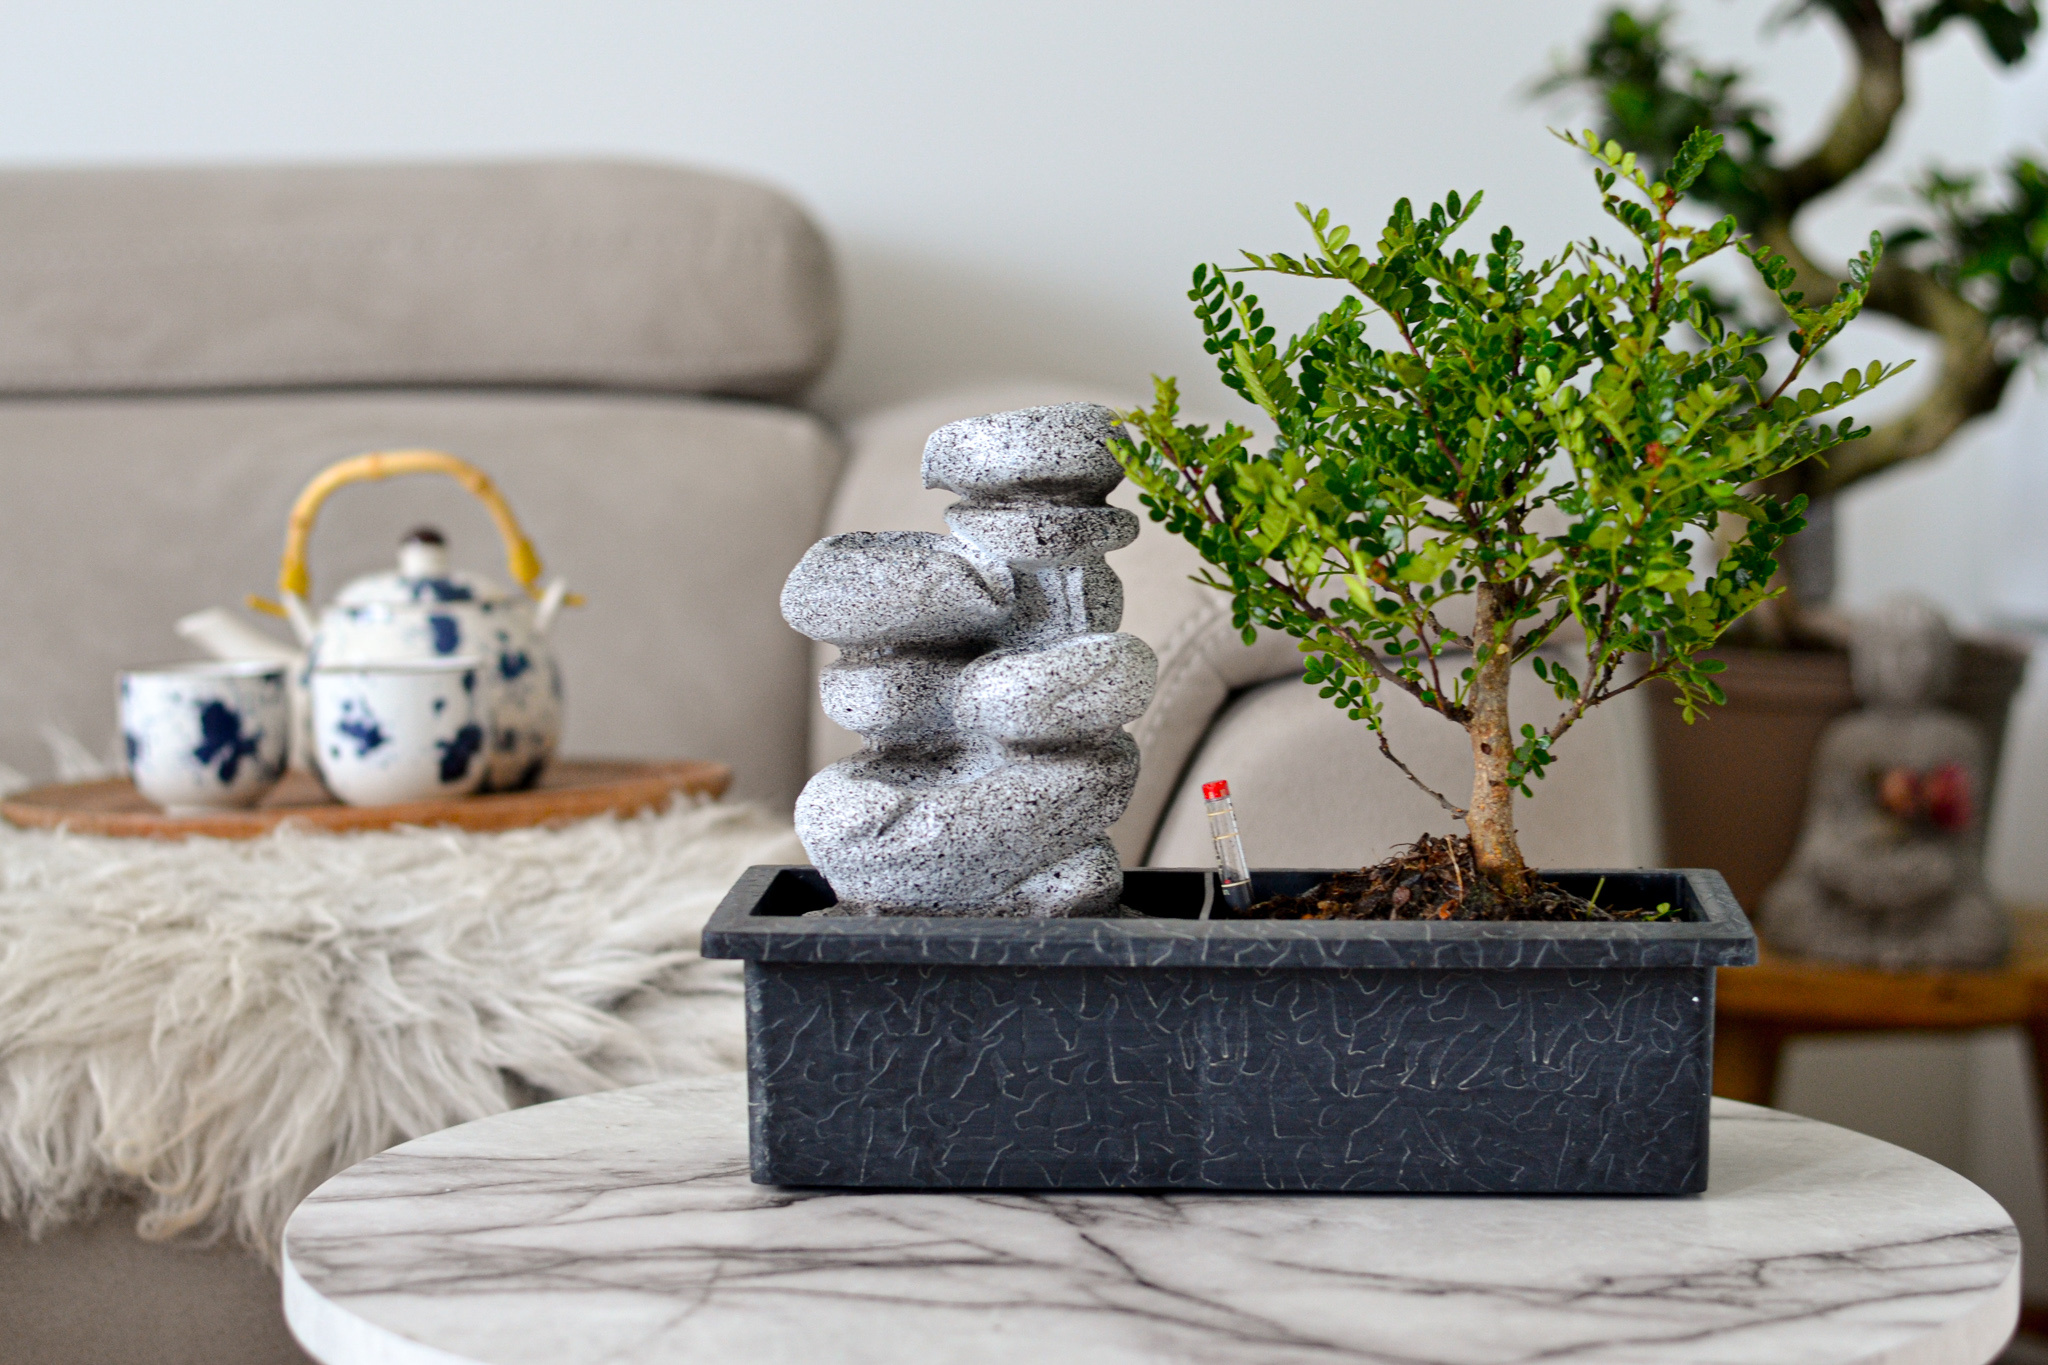 Bonsai tree with Easy-care watering system - Zen stones - Height 25-35cm